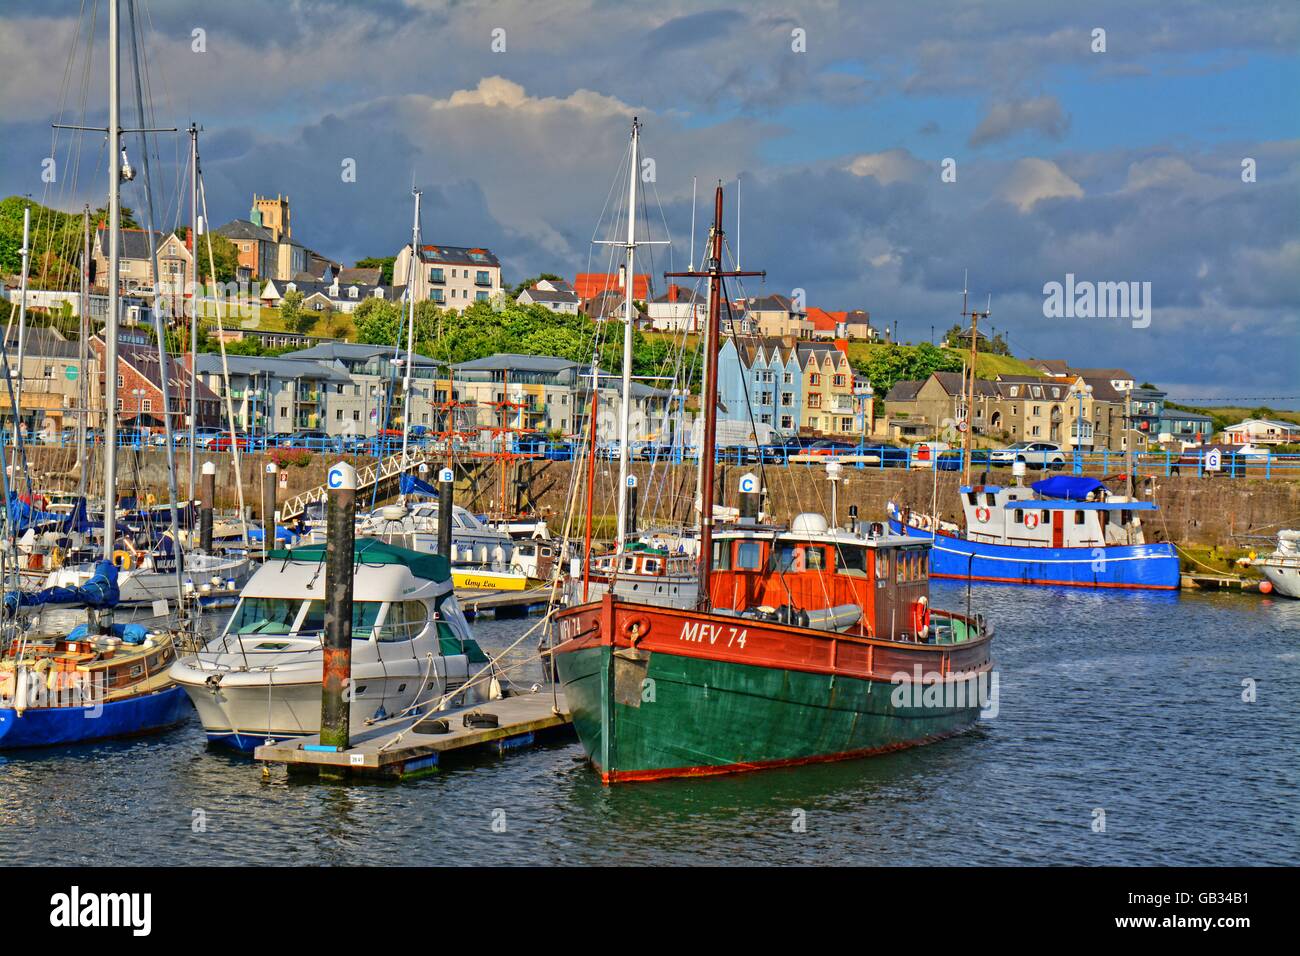 Milford Haven, Wales - fishing boats and other smaller boats at Milford`s heaven Stock Photo